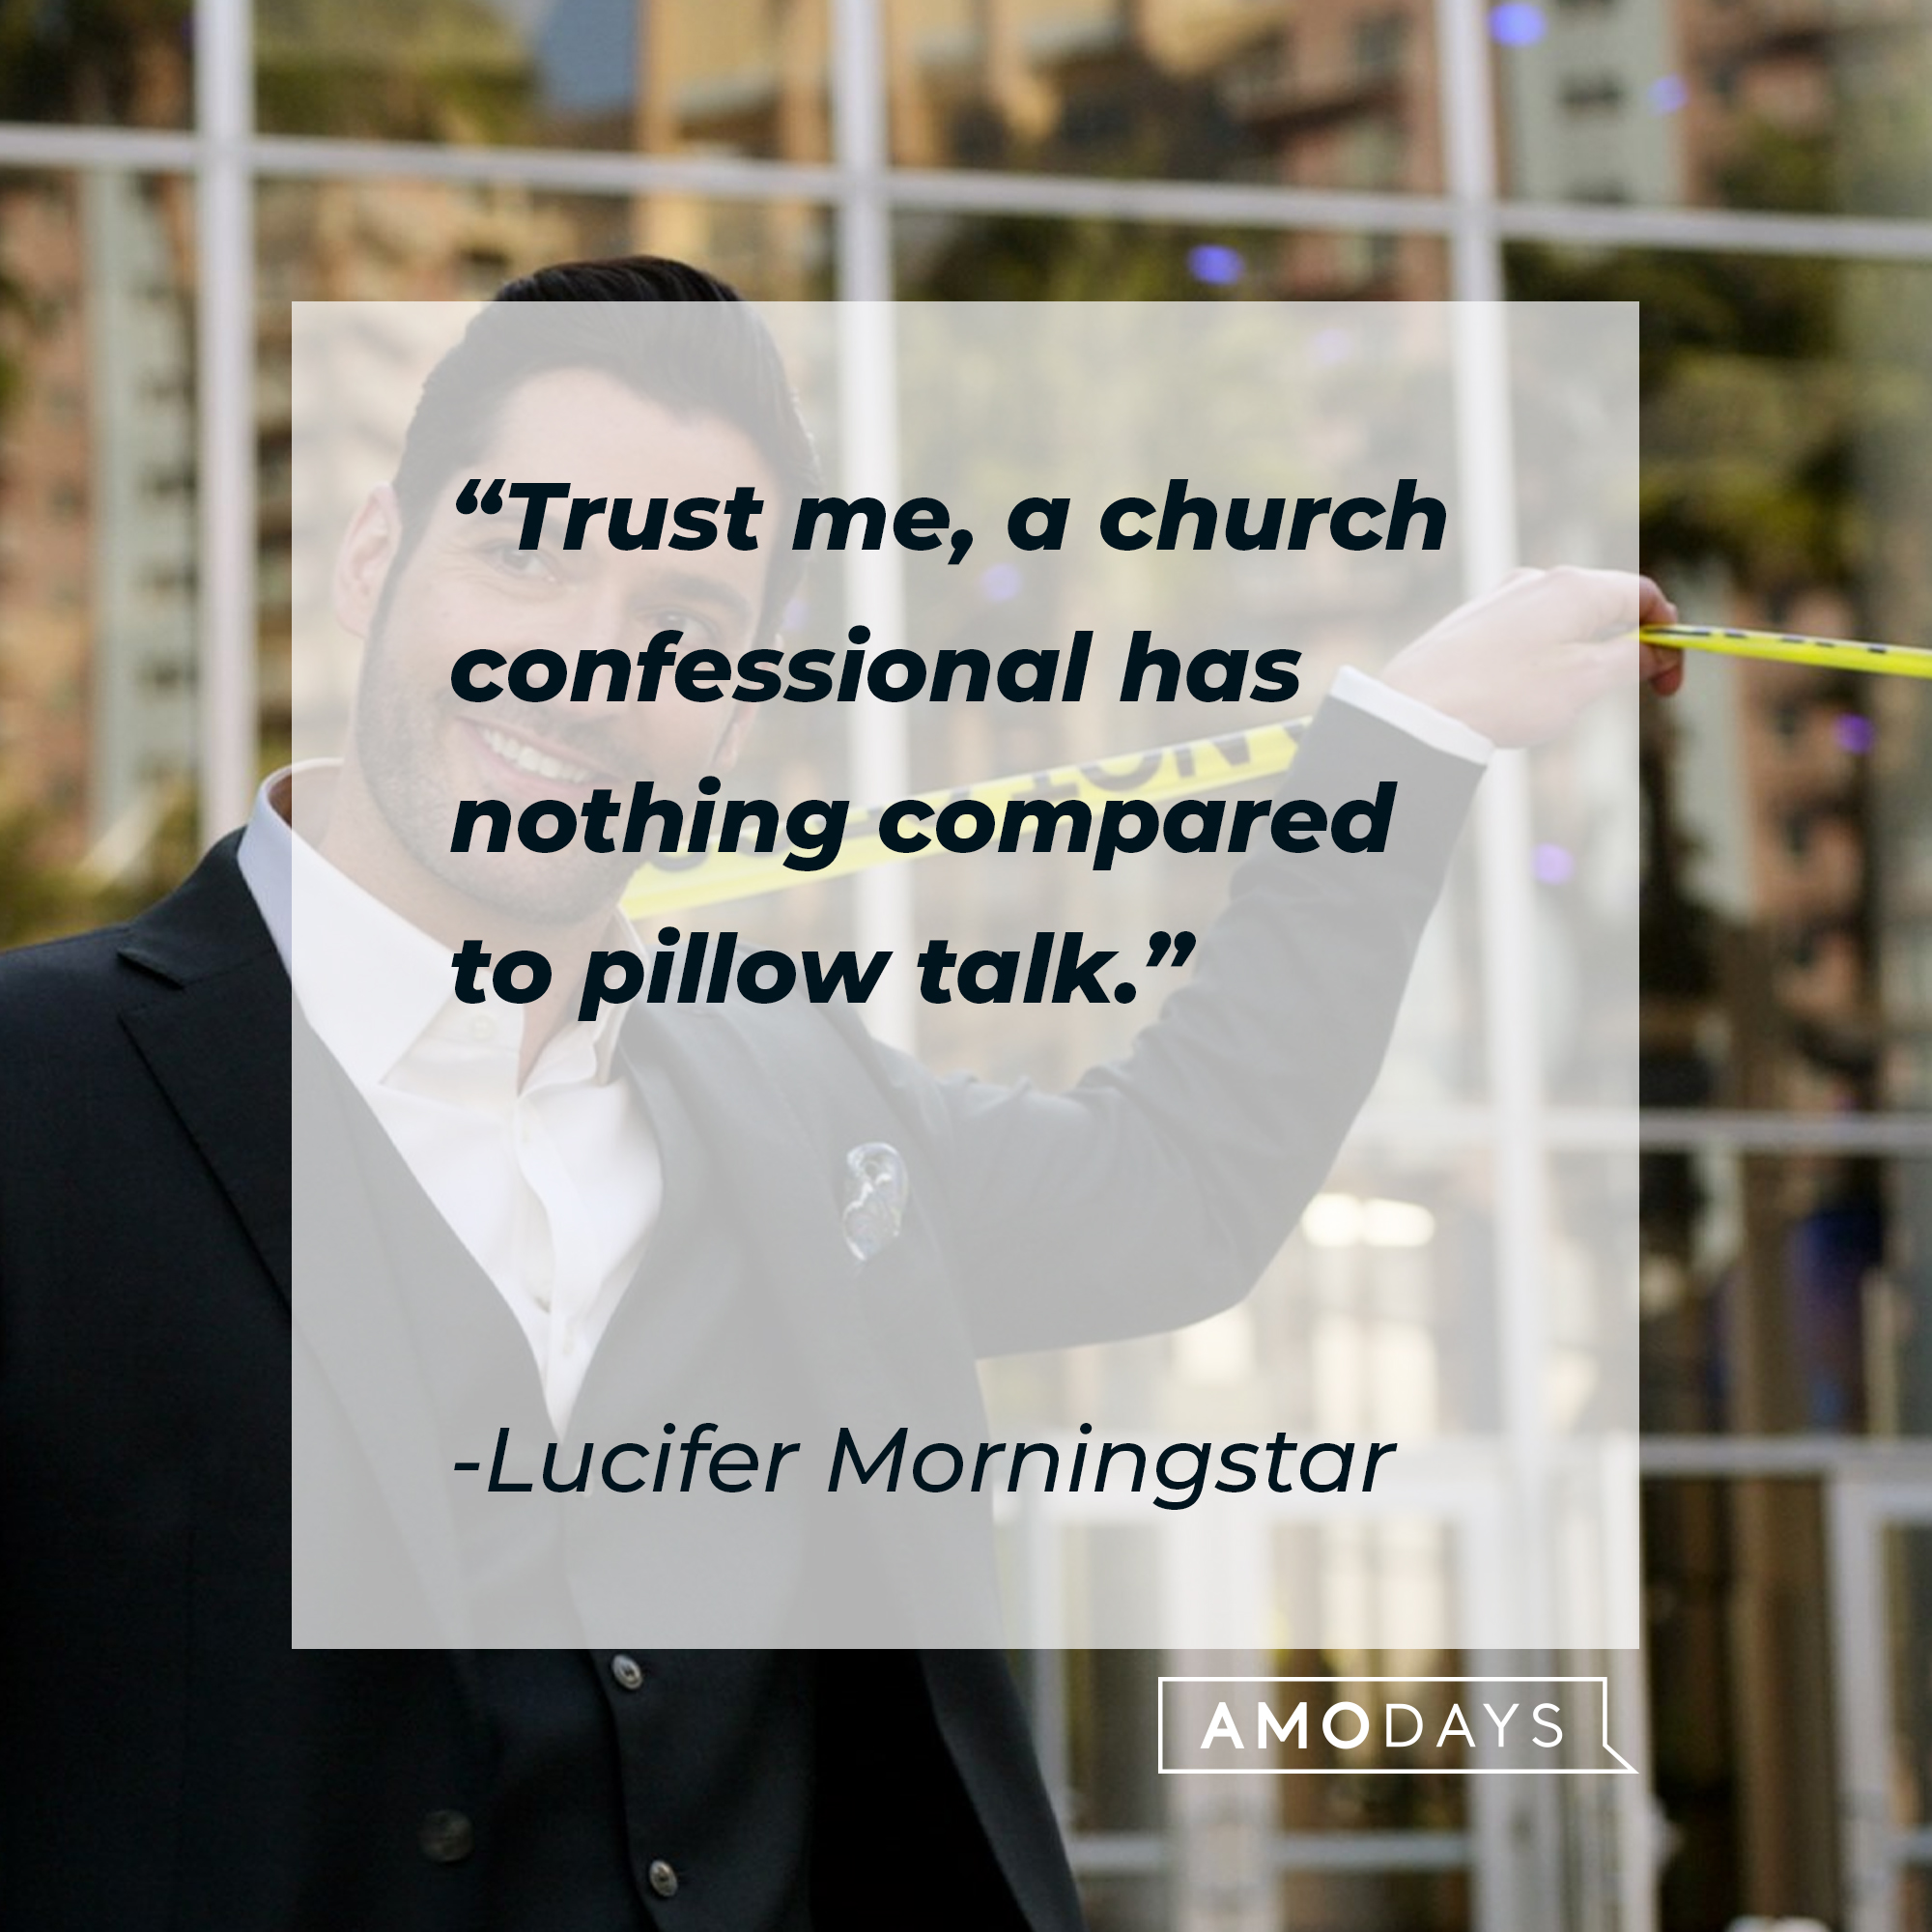 Lucifer Morningstar’s quote: "Trust me, a church confessional has nothing compared to pillow talk." | Source: Facebook.com/LuciferNetflix